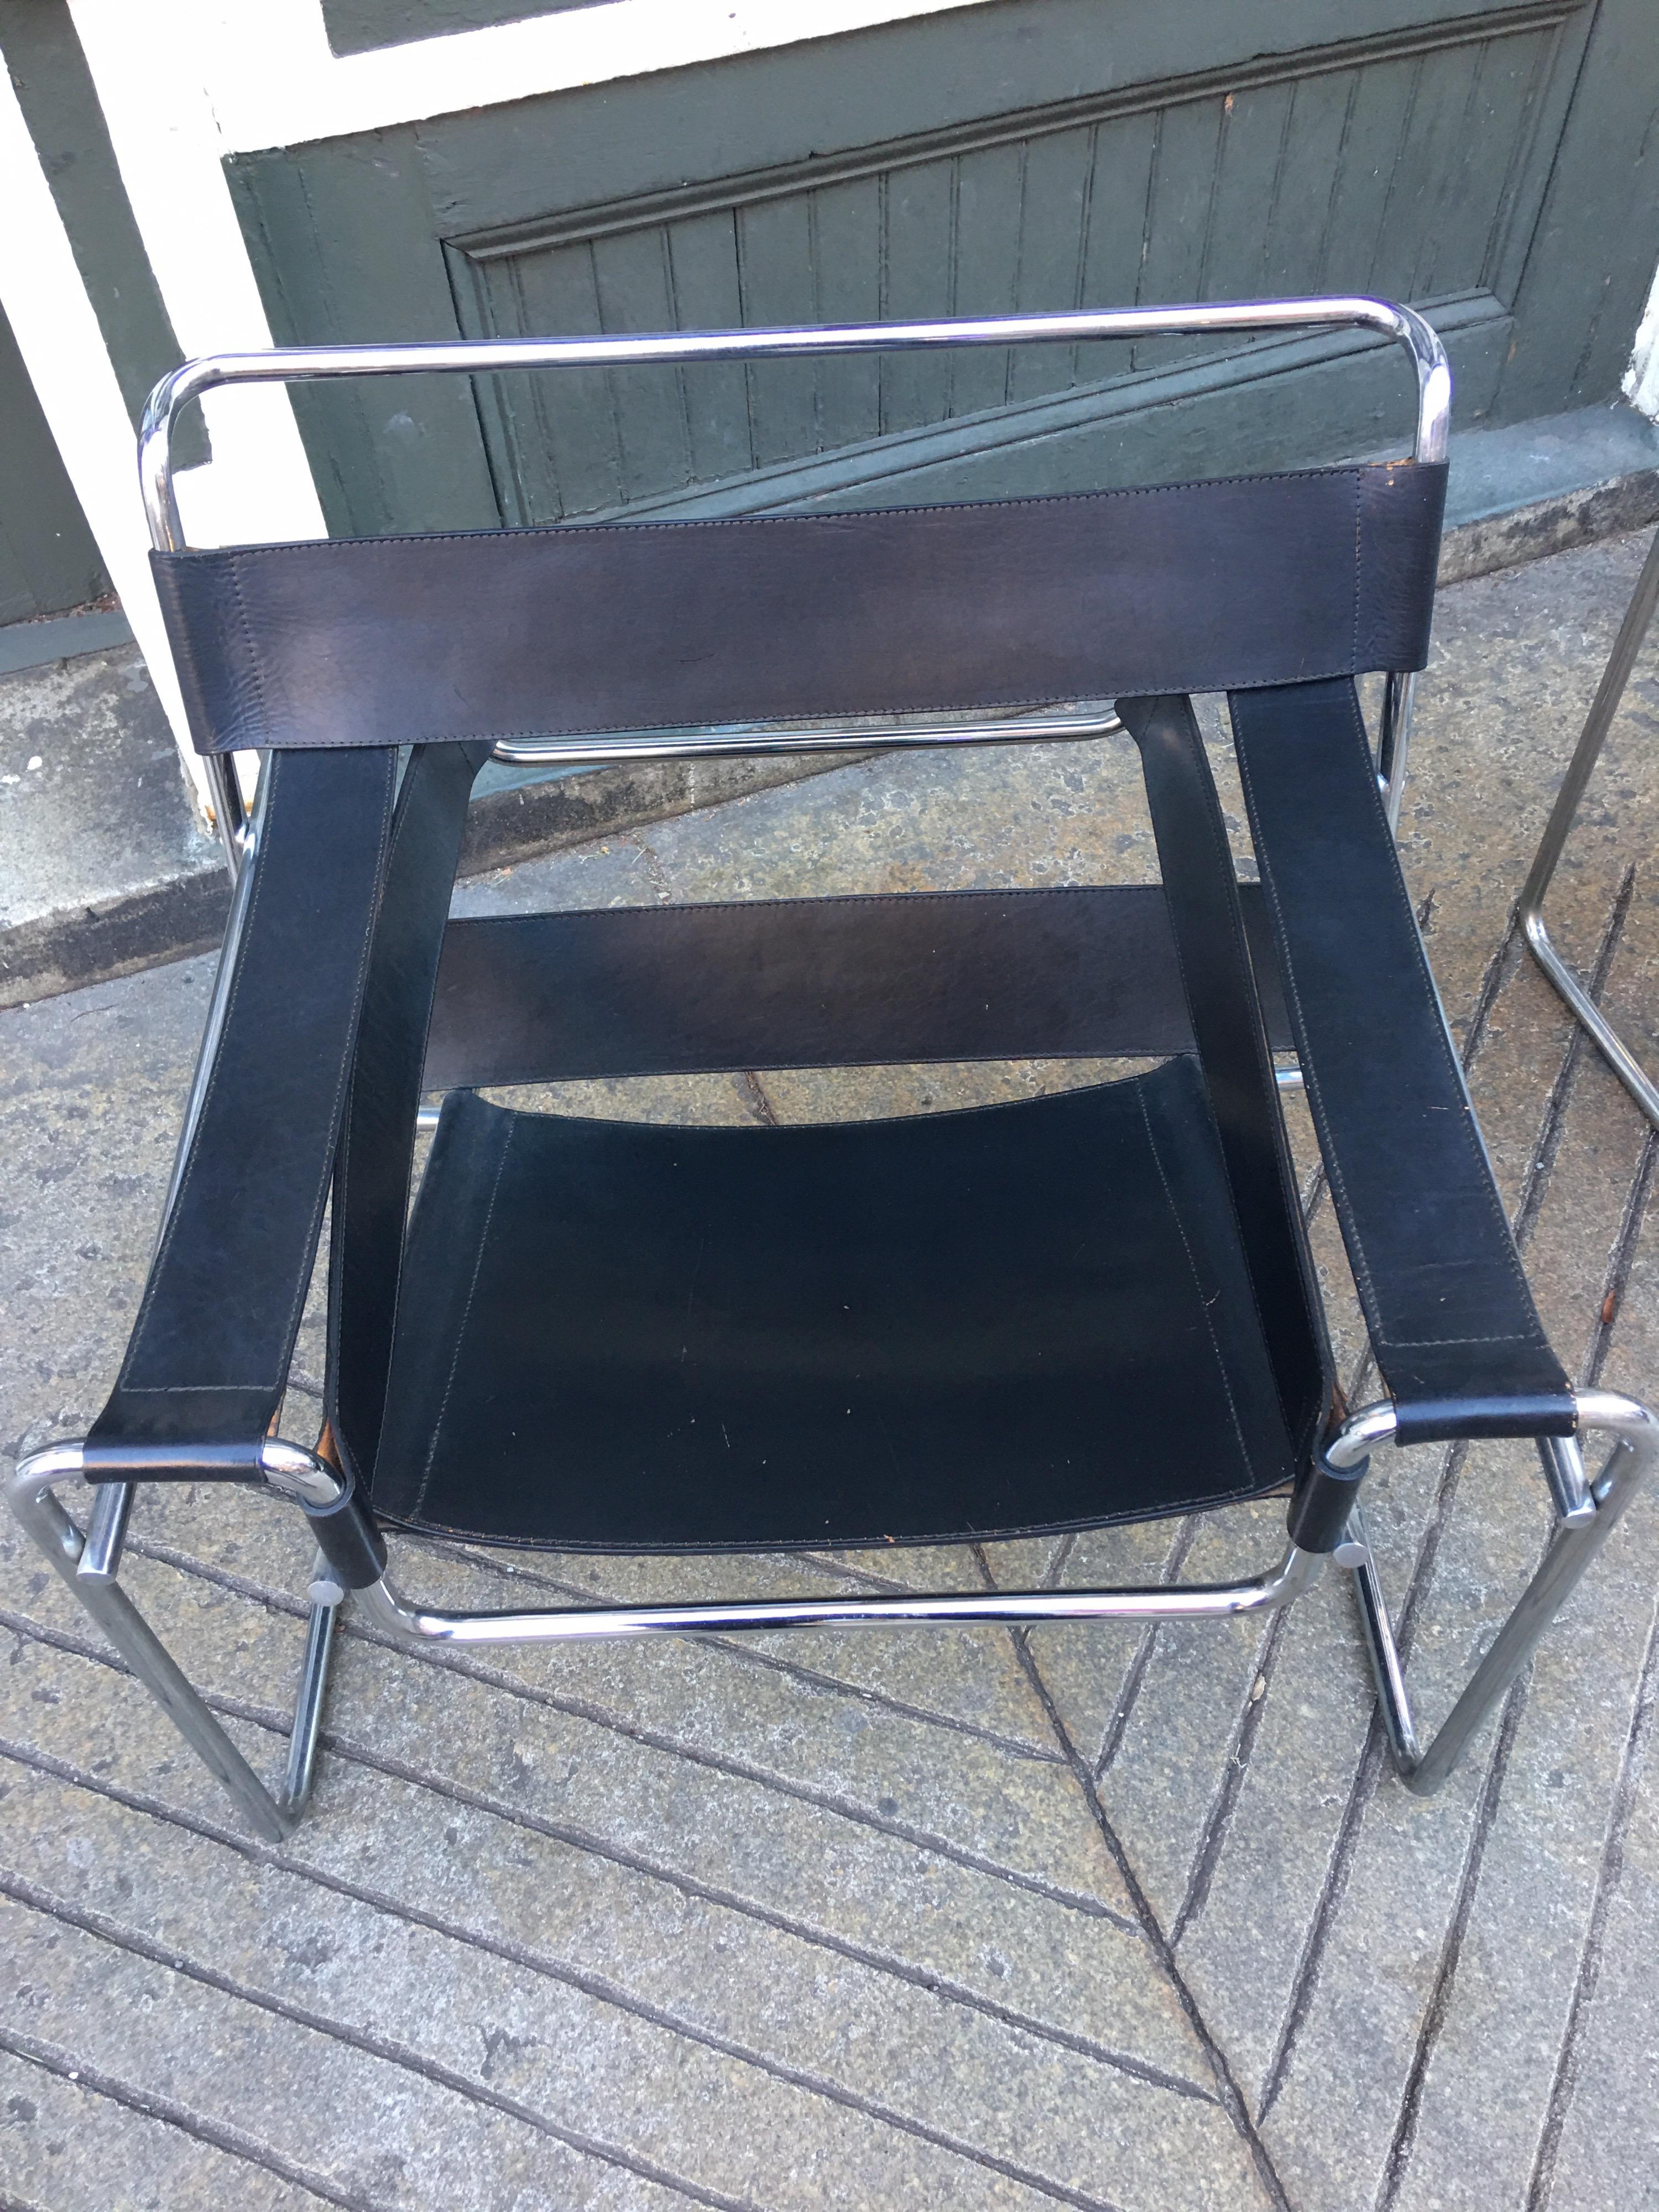 Marcel Breuer Wassily chair in black leather, retains it's Knoll Label. Probably from the 1970s, shows nice amount of Patina. Chrome is very clean.